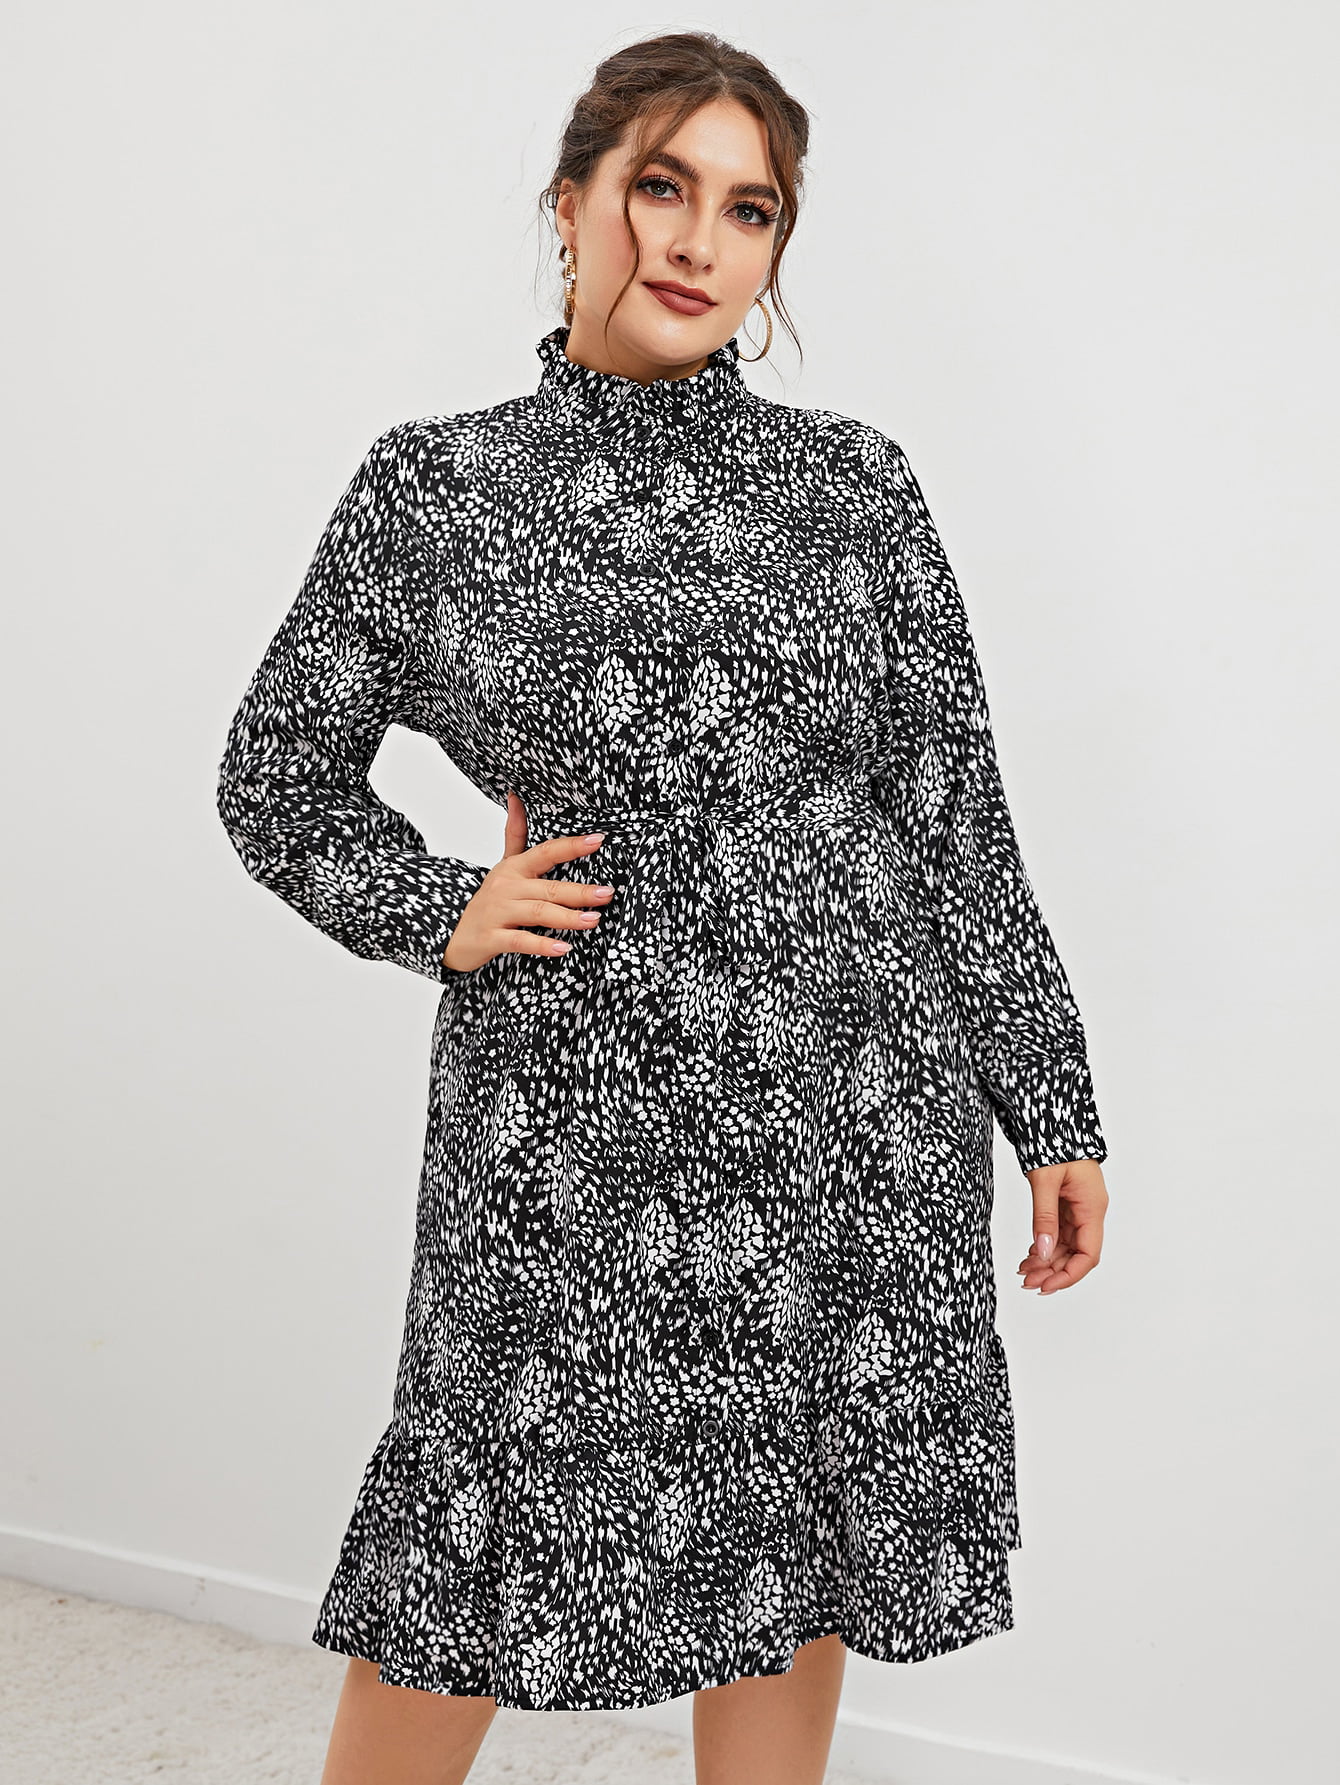 Details about   Ethnic Cocktail Straight Dress Cotton Geometric Printed Blue & Beige 3/4 Sleeves 